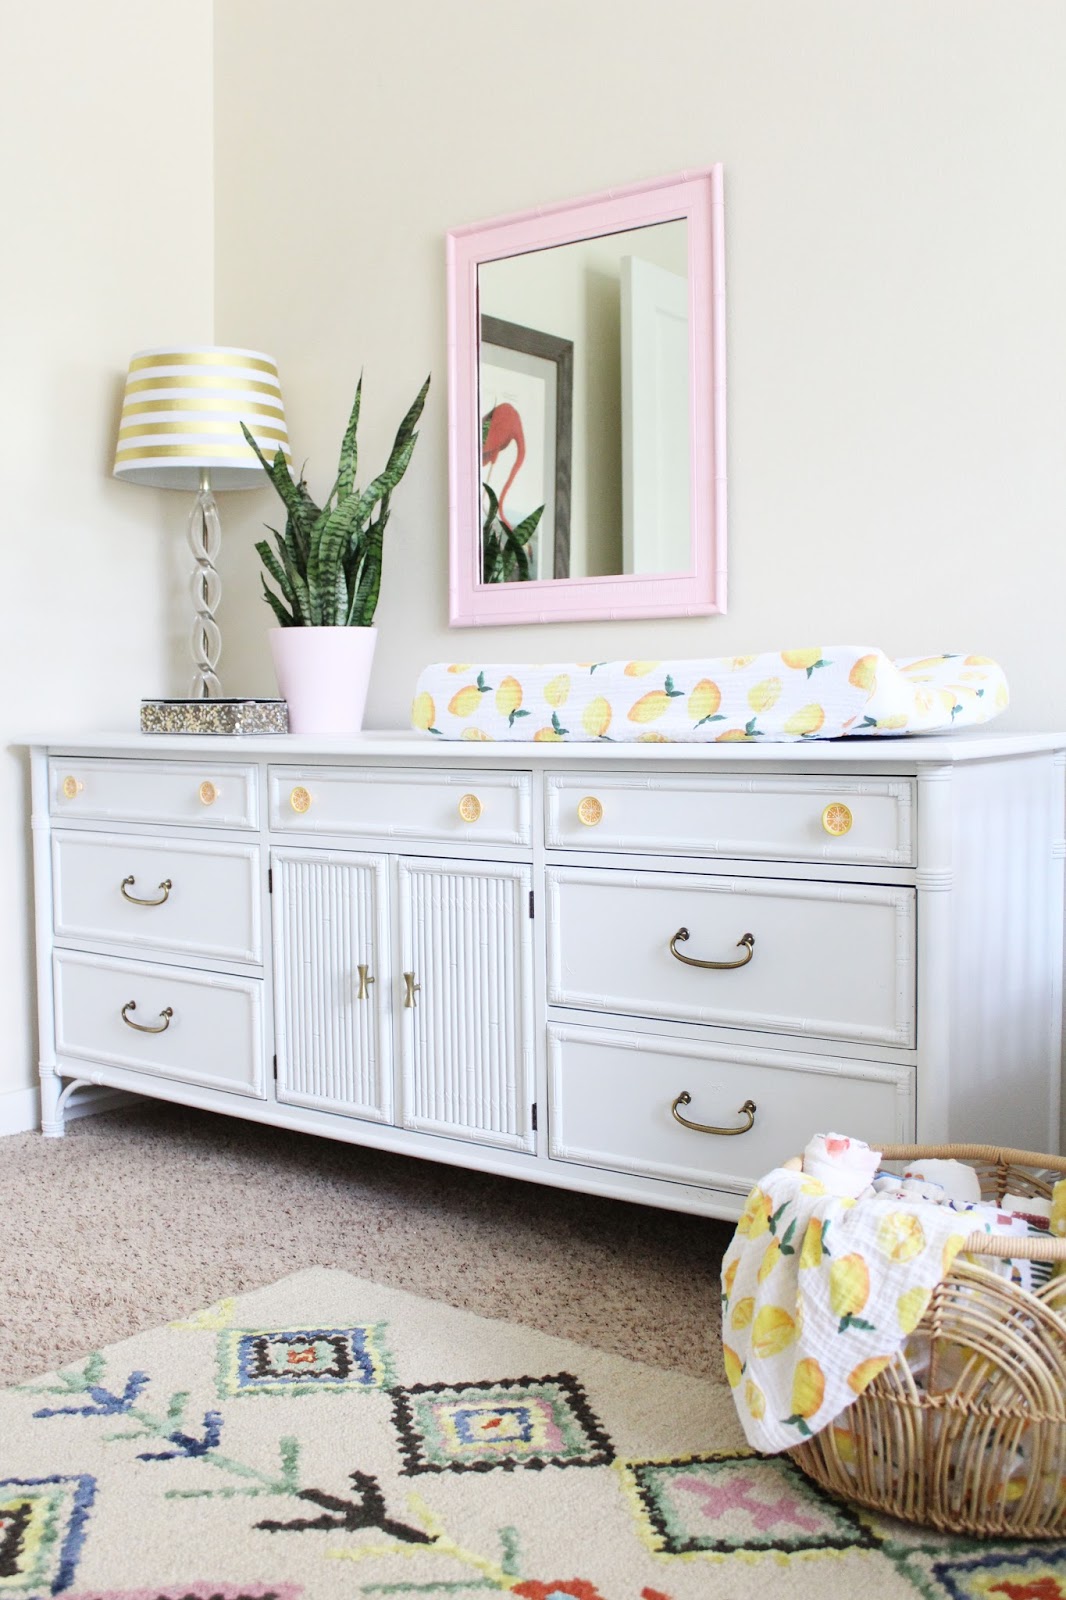 2 Vintage Diy Makeovers And A Nursery Sneak Peek Stripes And Whimsy